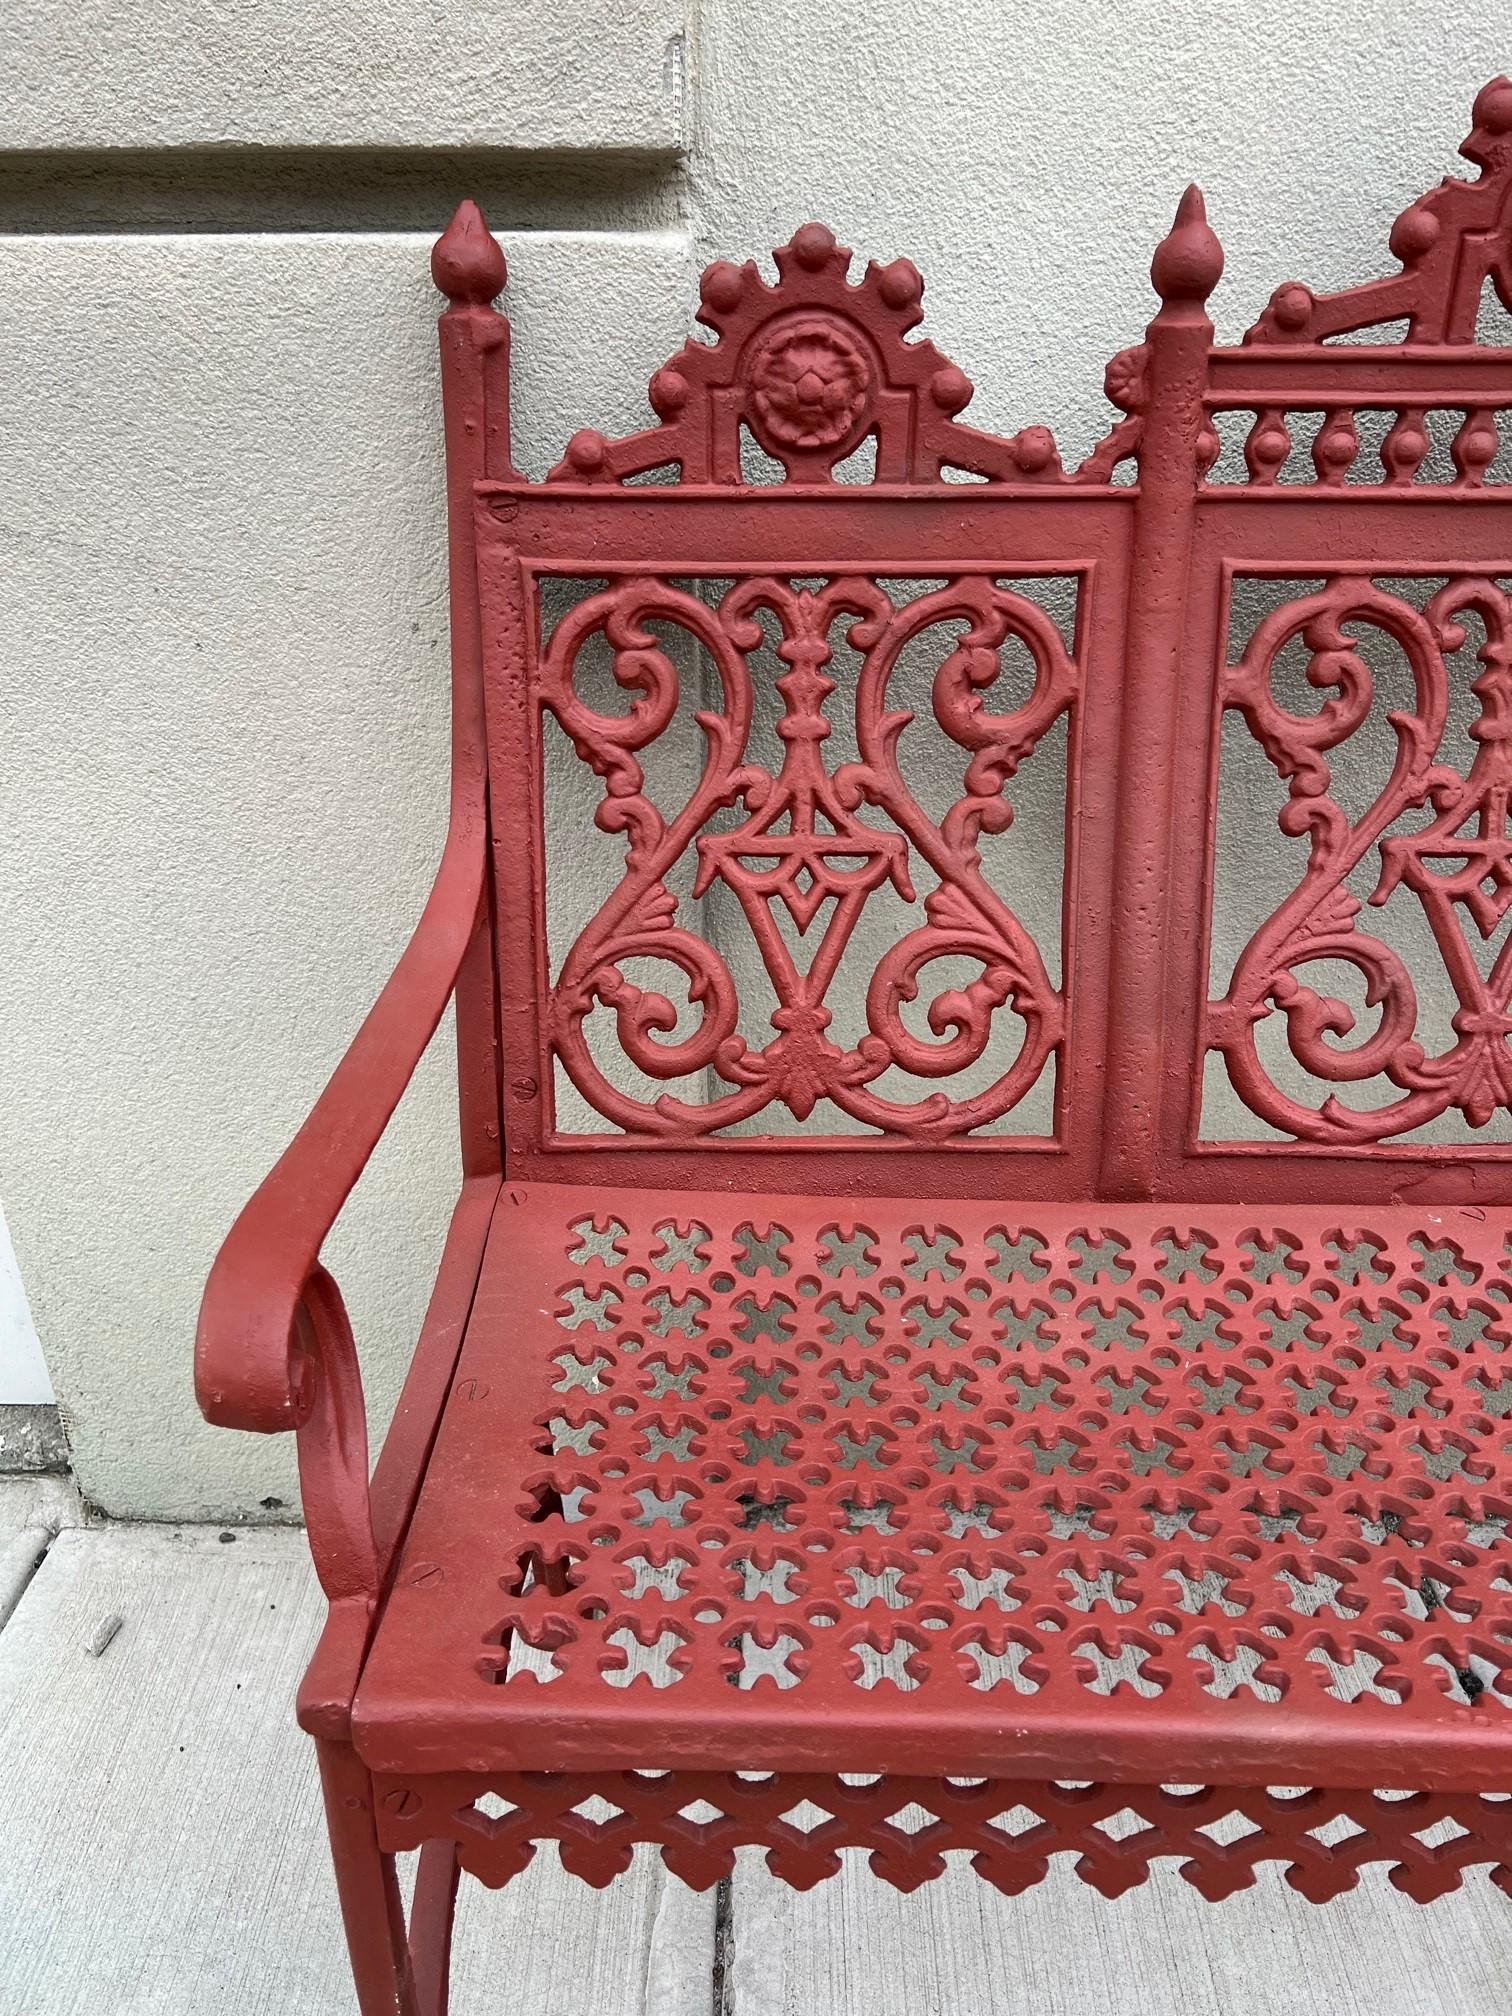 American Vintage Cast Aluminum Garden Bench in The Style of William Adams Foundry  